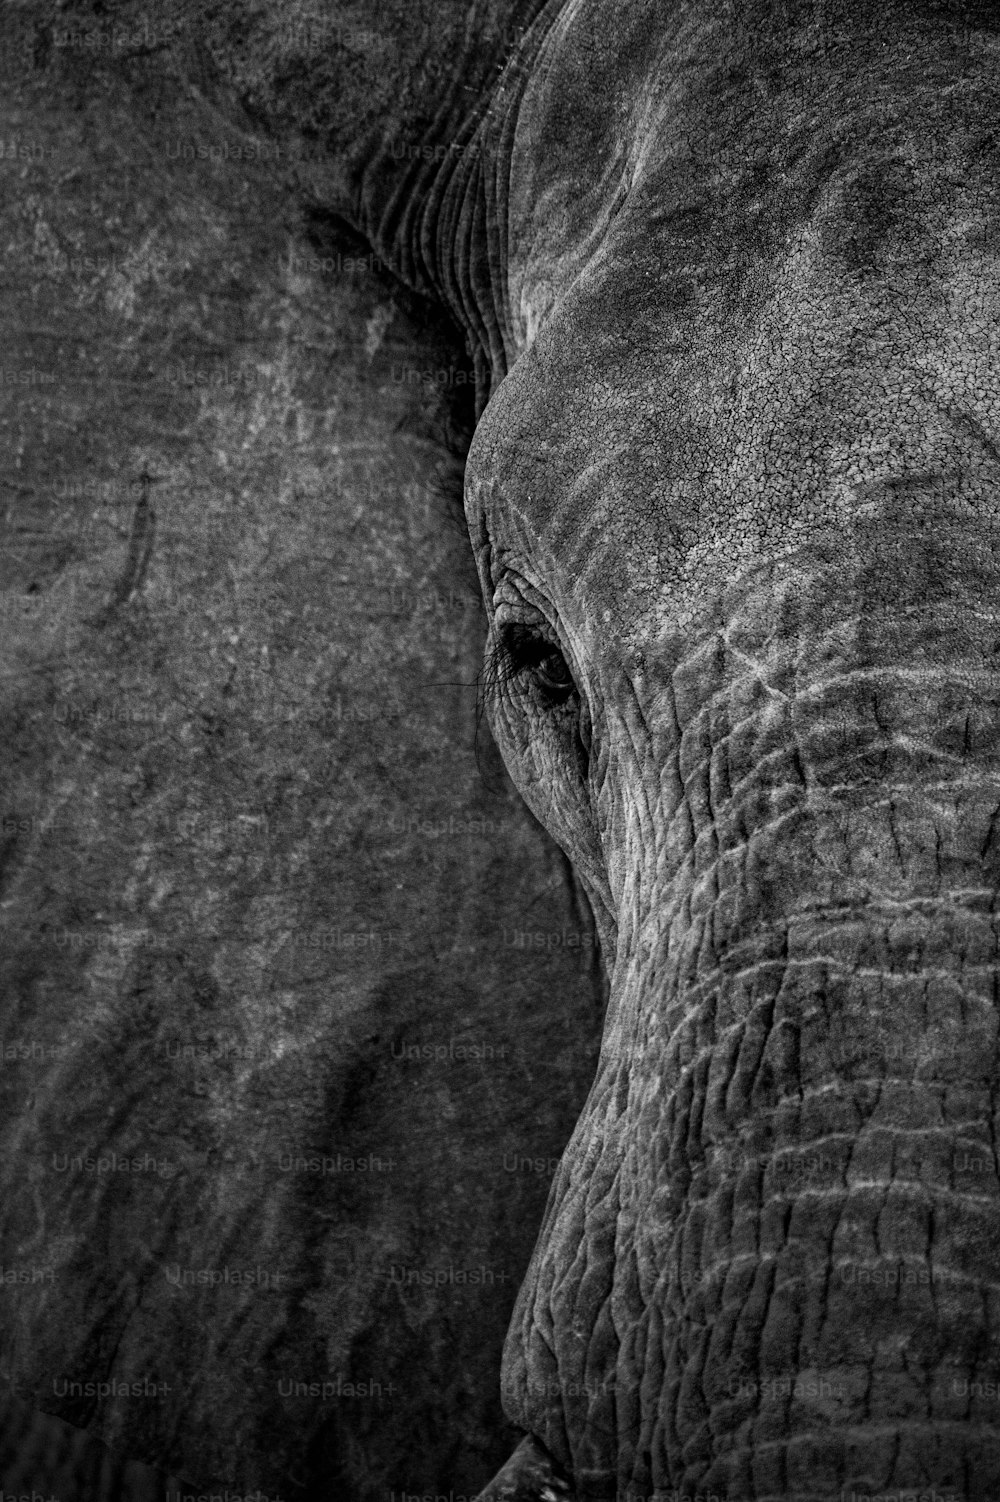 a black and white photo of an elephant's face